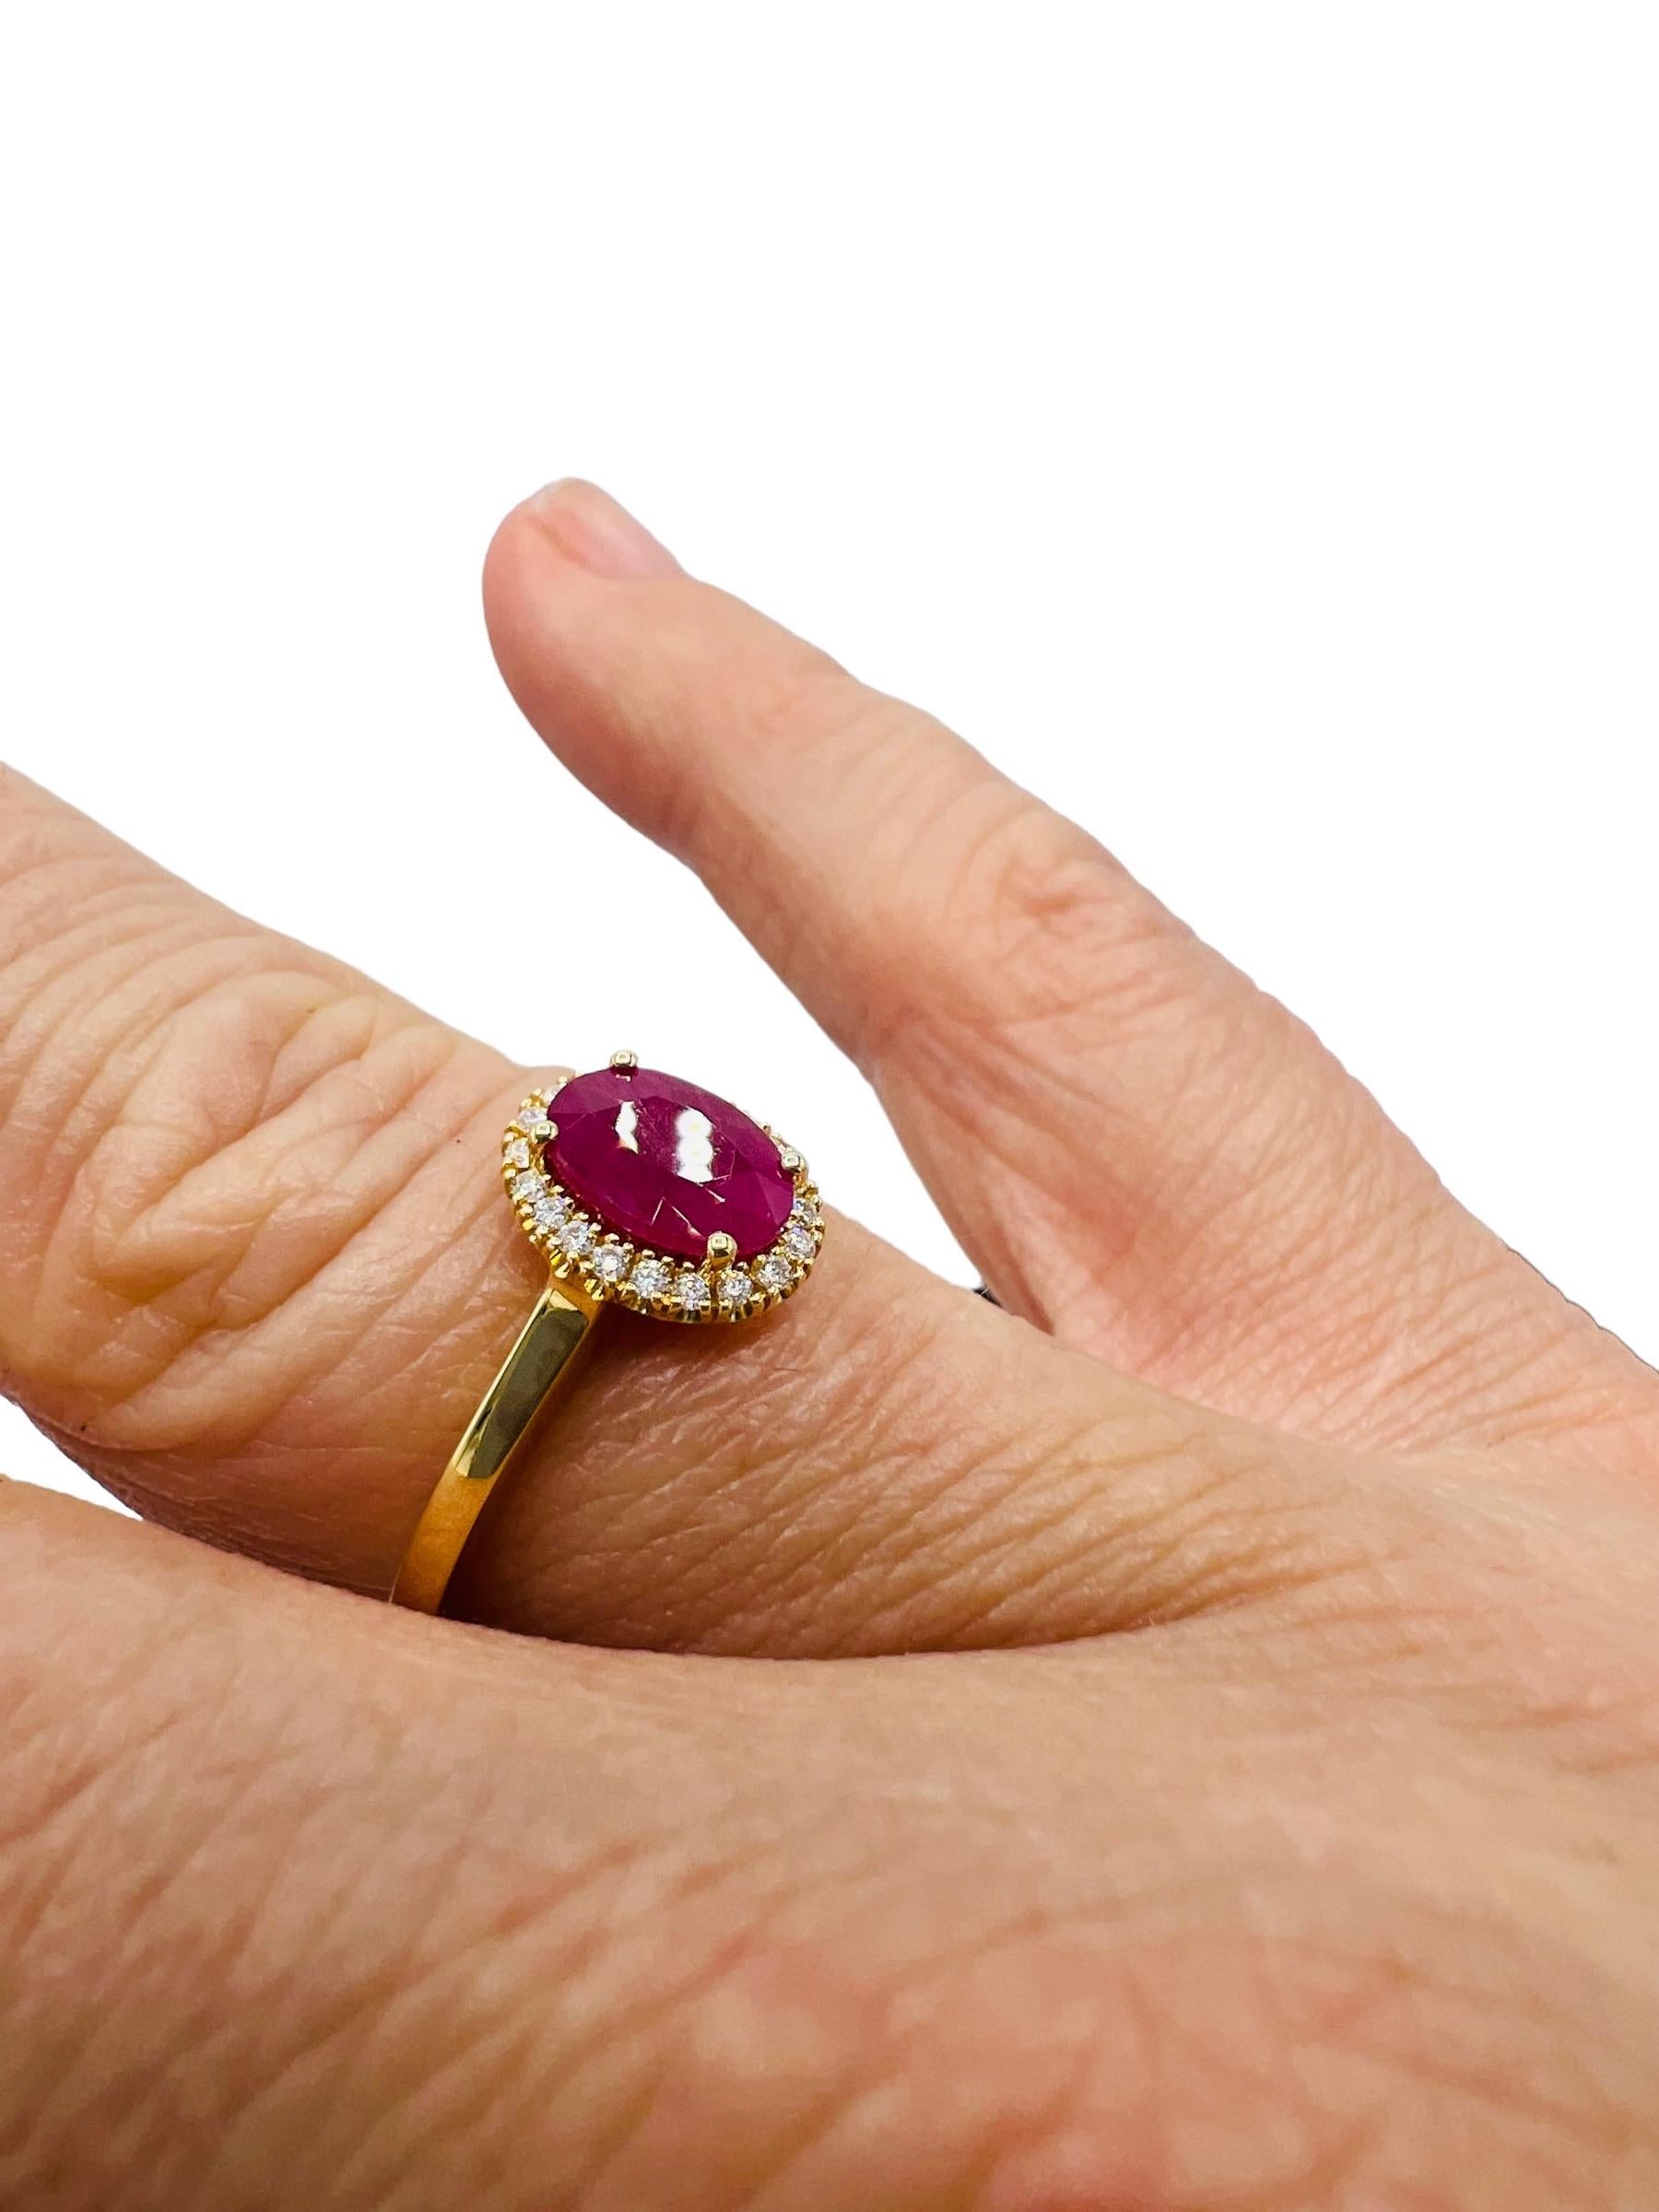 18-Carat Gold Ring, Set with a Ruby in Its Center, Paved with Brilliants 1